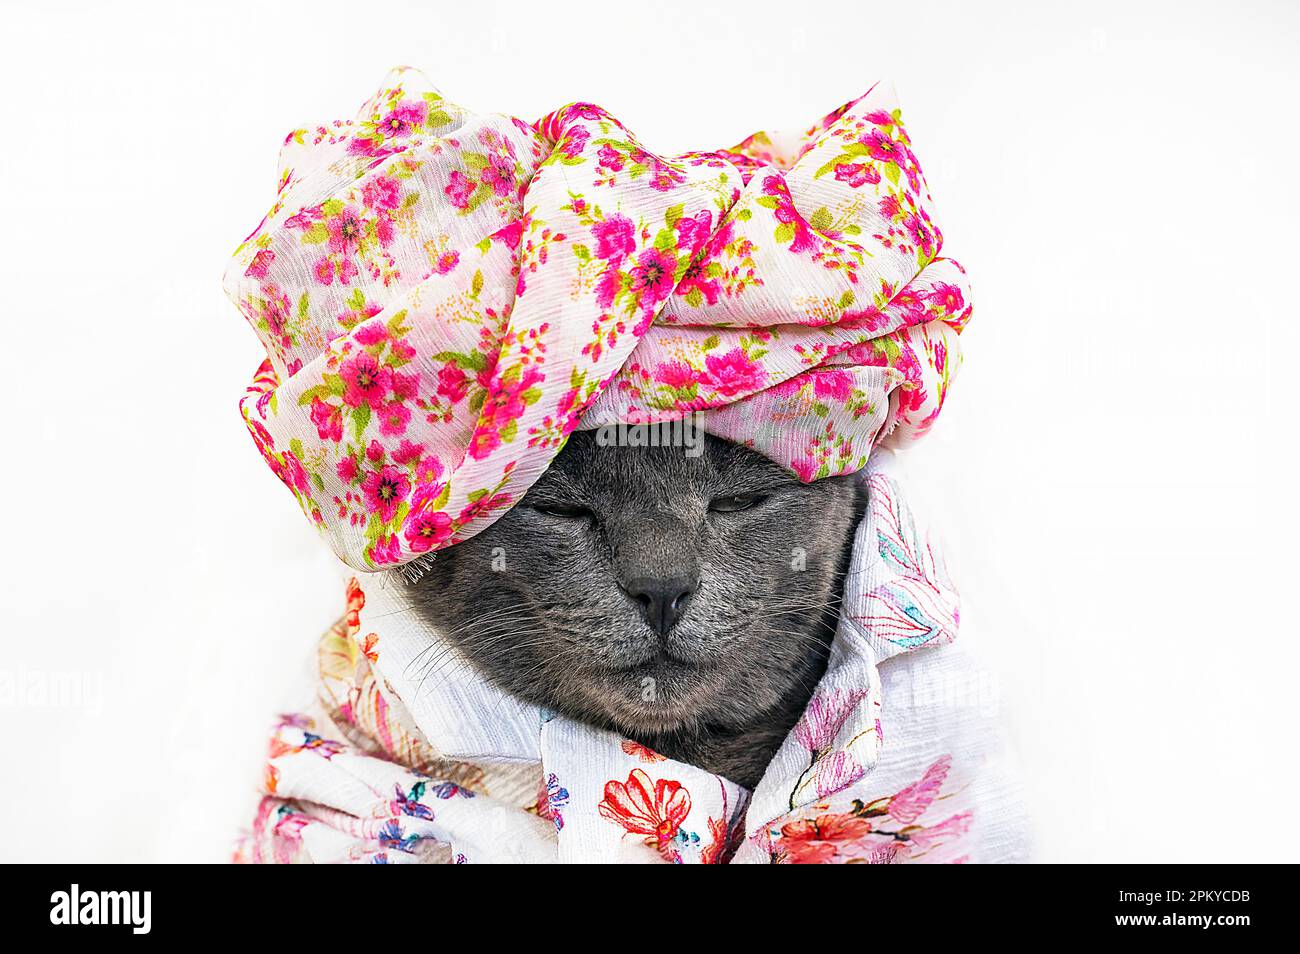 beautiful gray sleeping cat in a flower turban and jacket on a light background Stock Photo